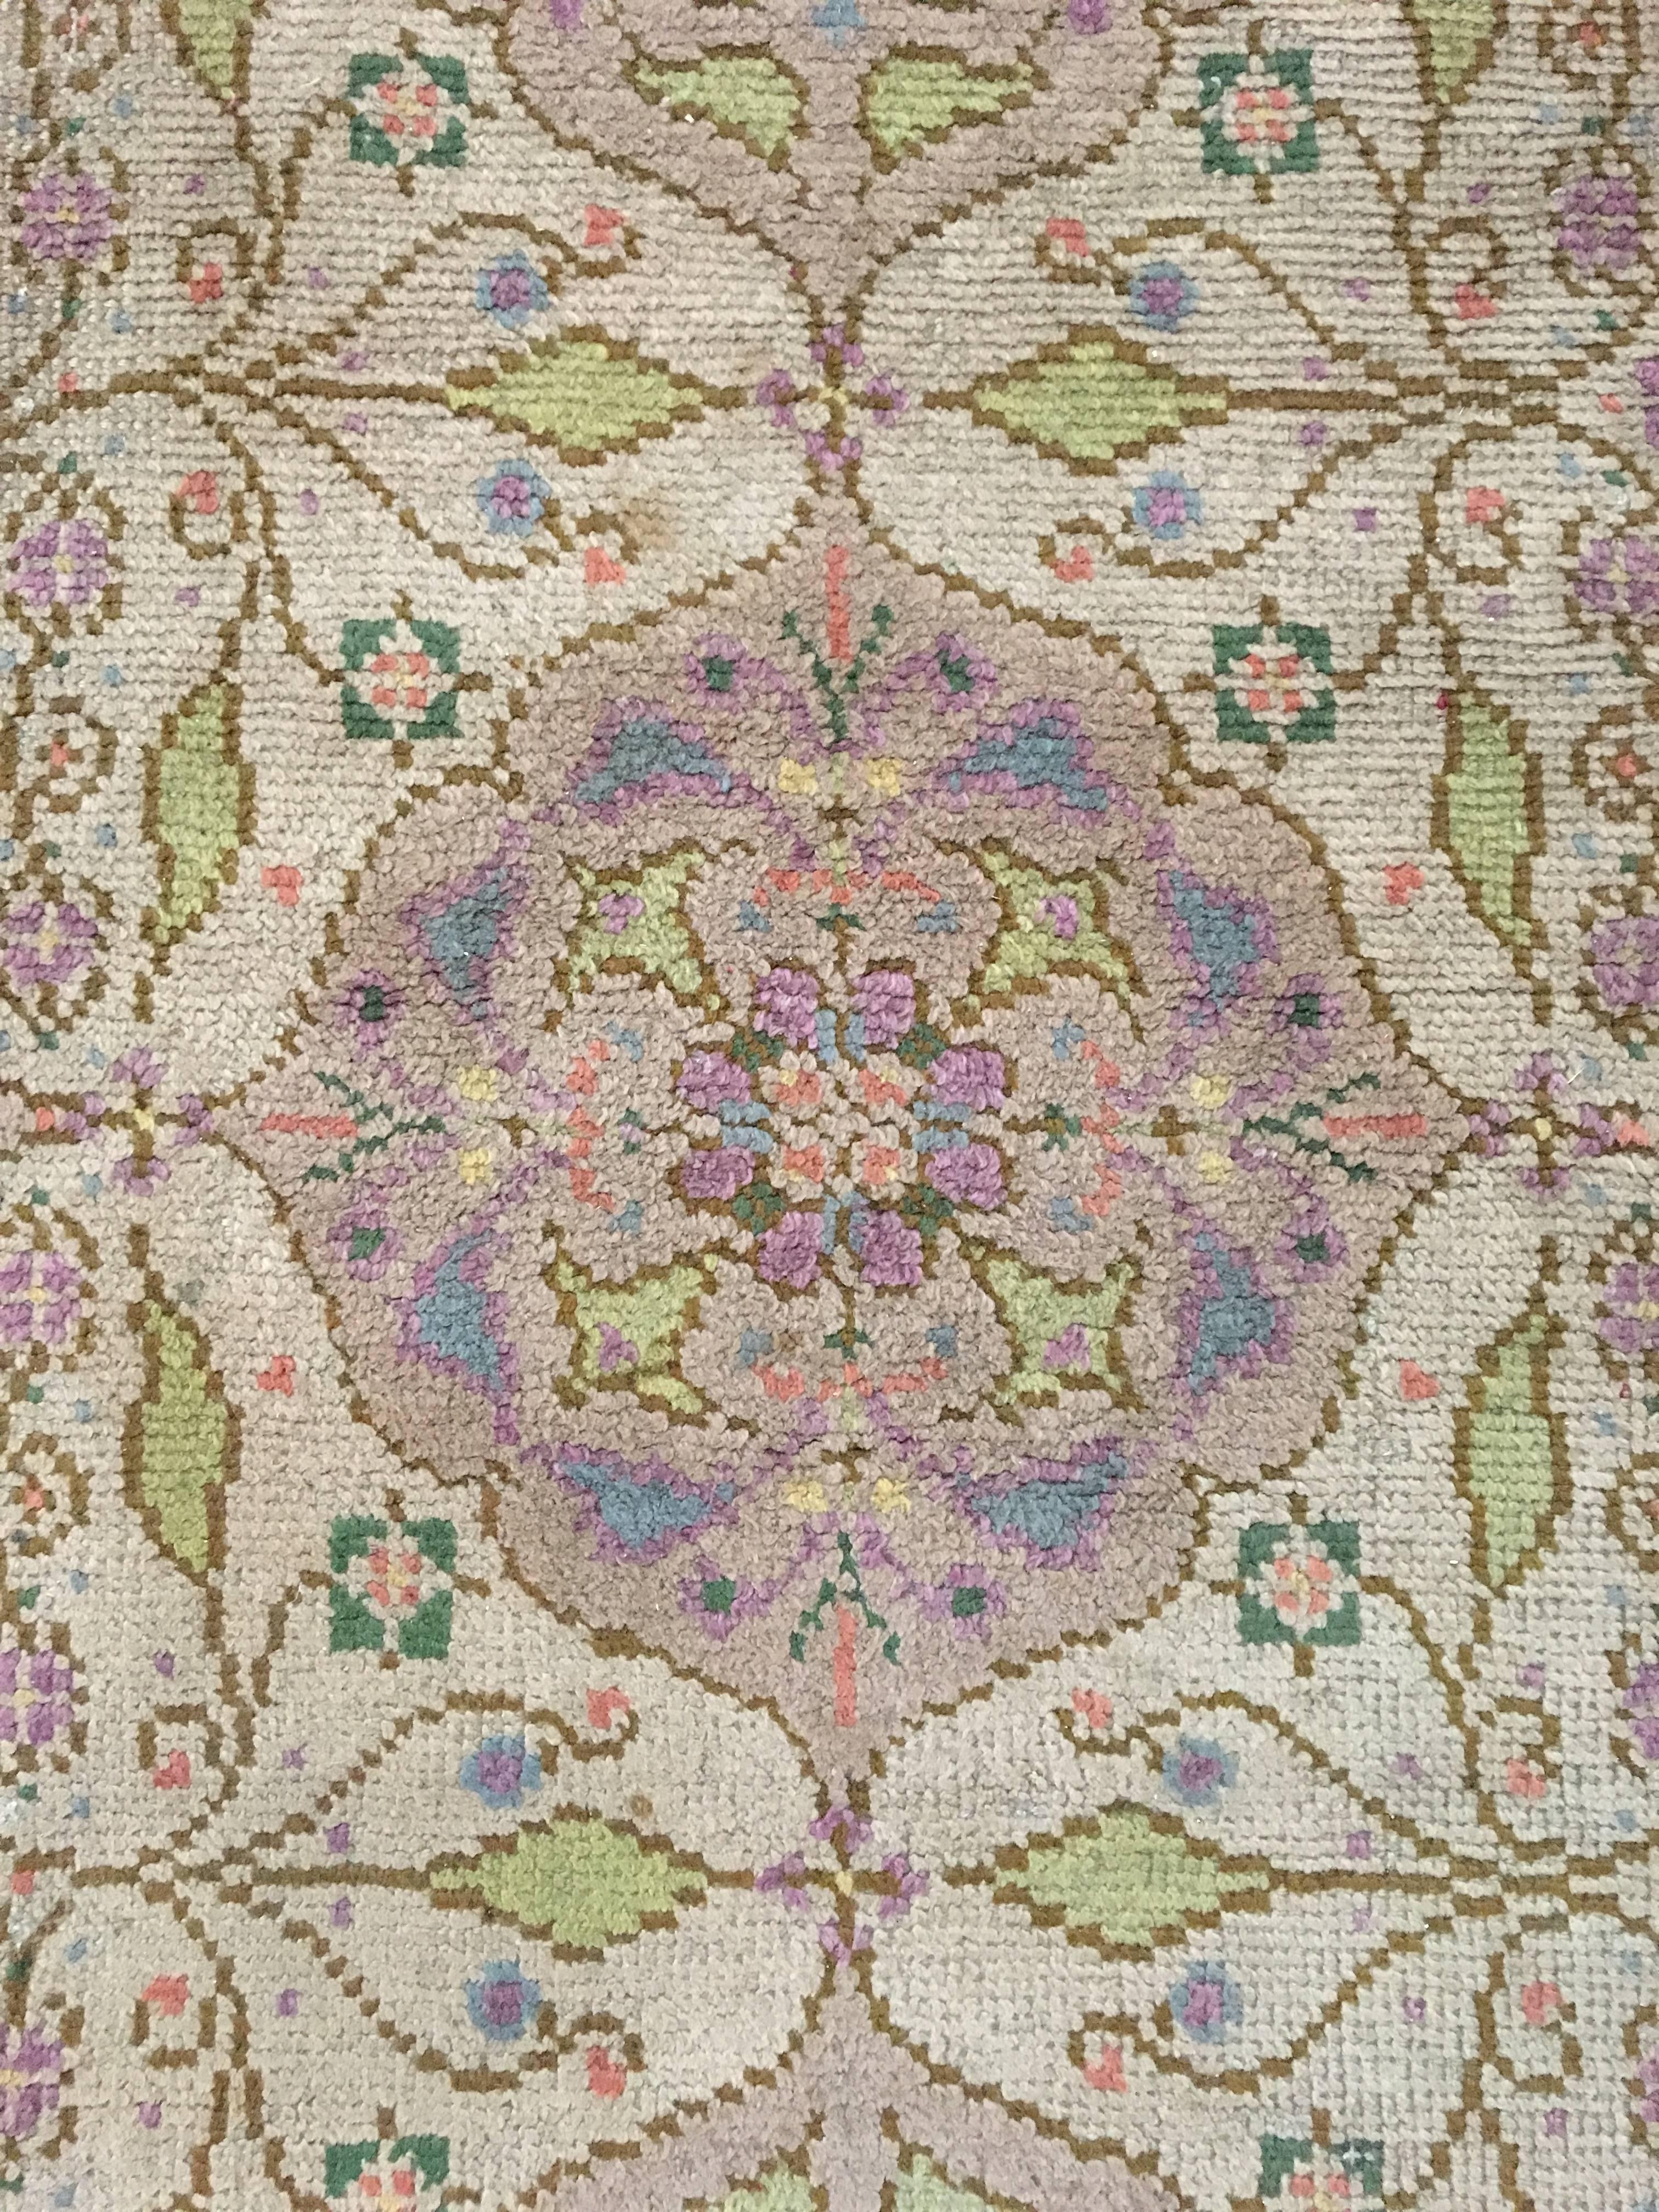 Late 19th Century Art Nouveau Hand-Knotted Carpet with Floral Design, Theo Nieuwenhuis, 1890-1905